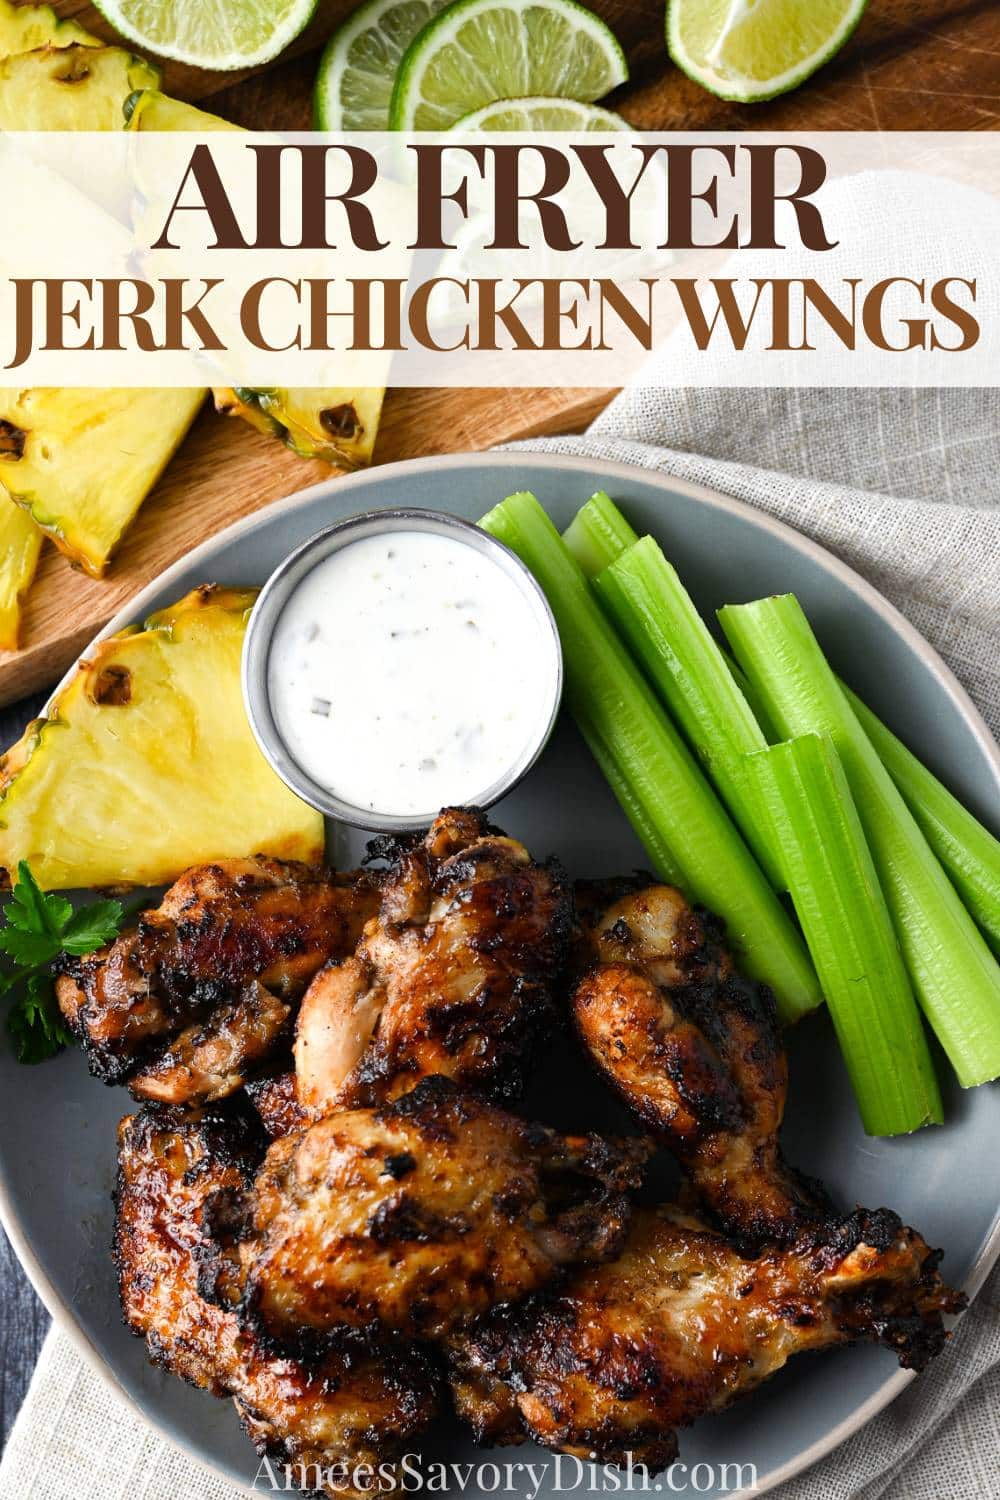 These Air Fryer Jerk Chicken Wings capture the crave-worthy qualities of Jamaica’s most famous dish! Hot and mild options included. via @Ameessavorydish